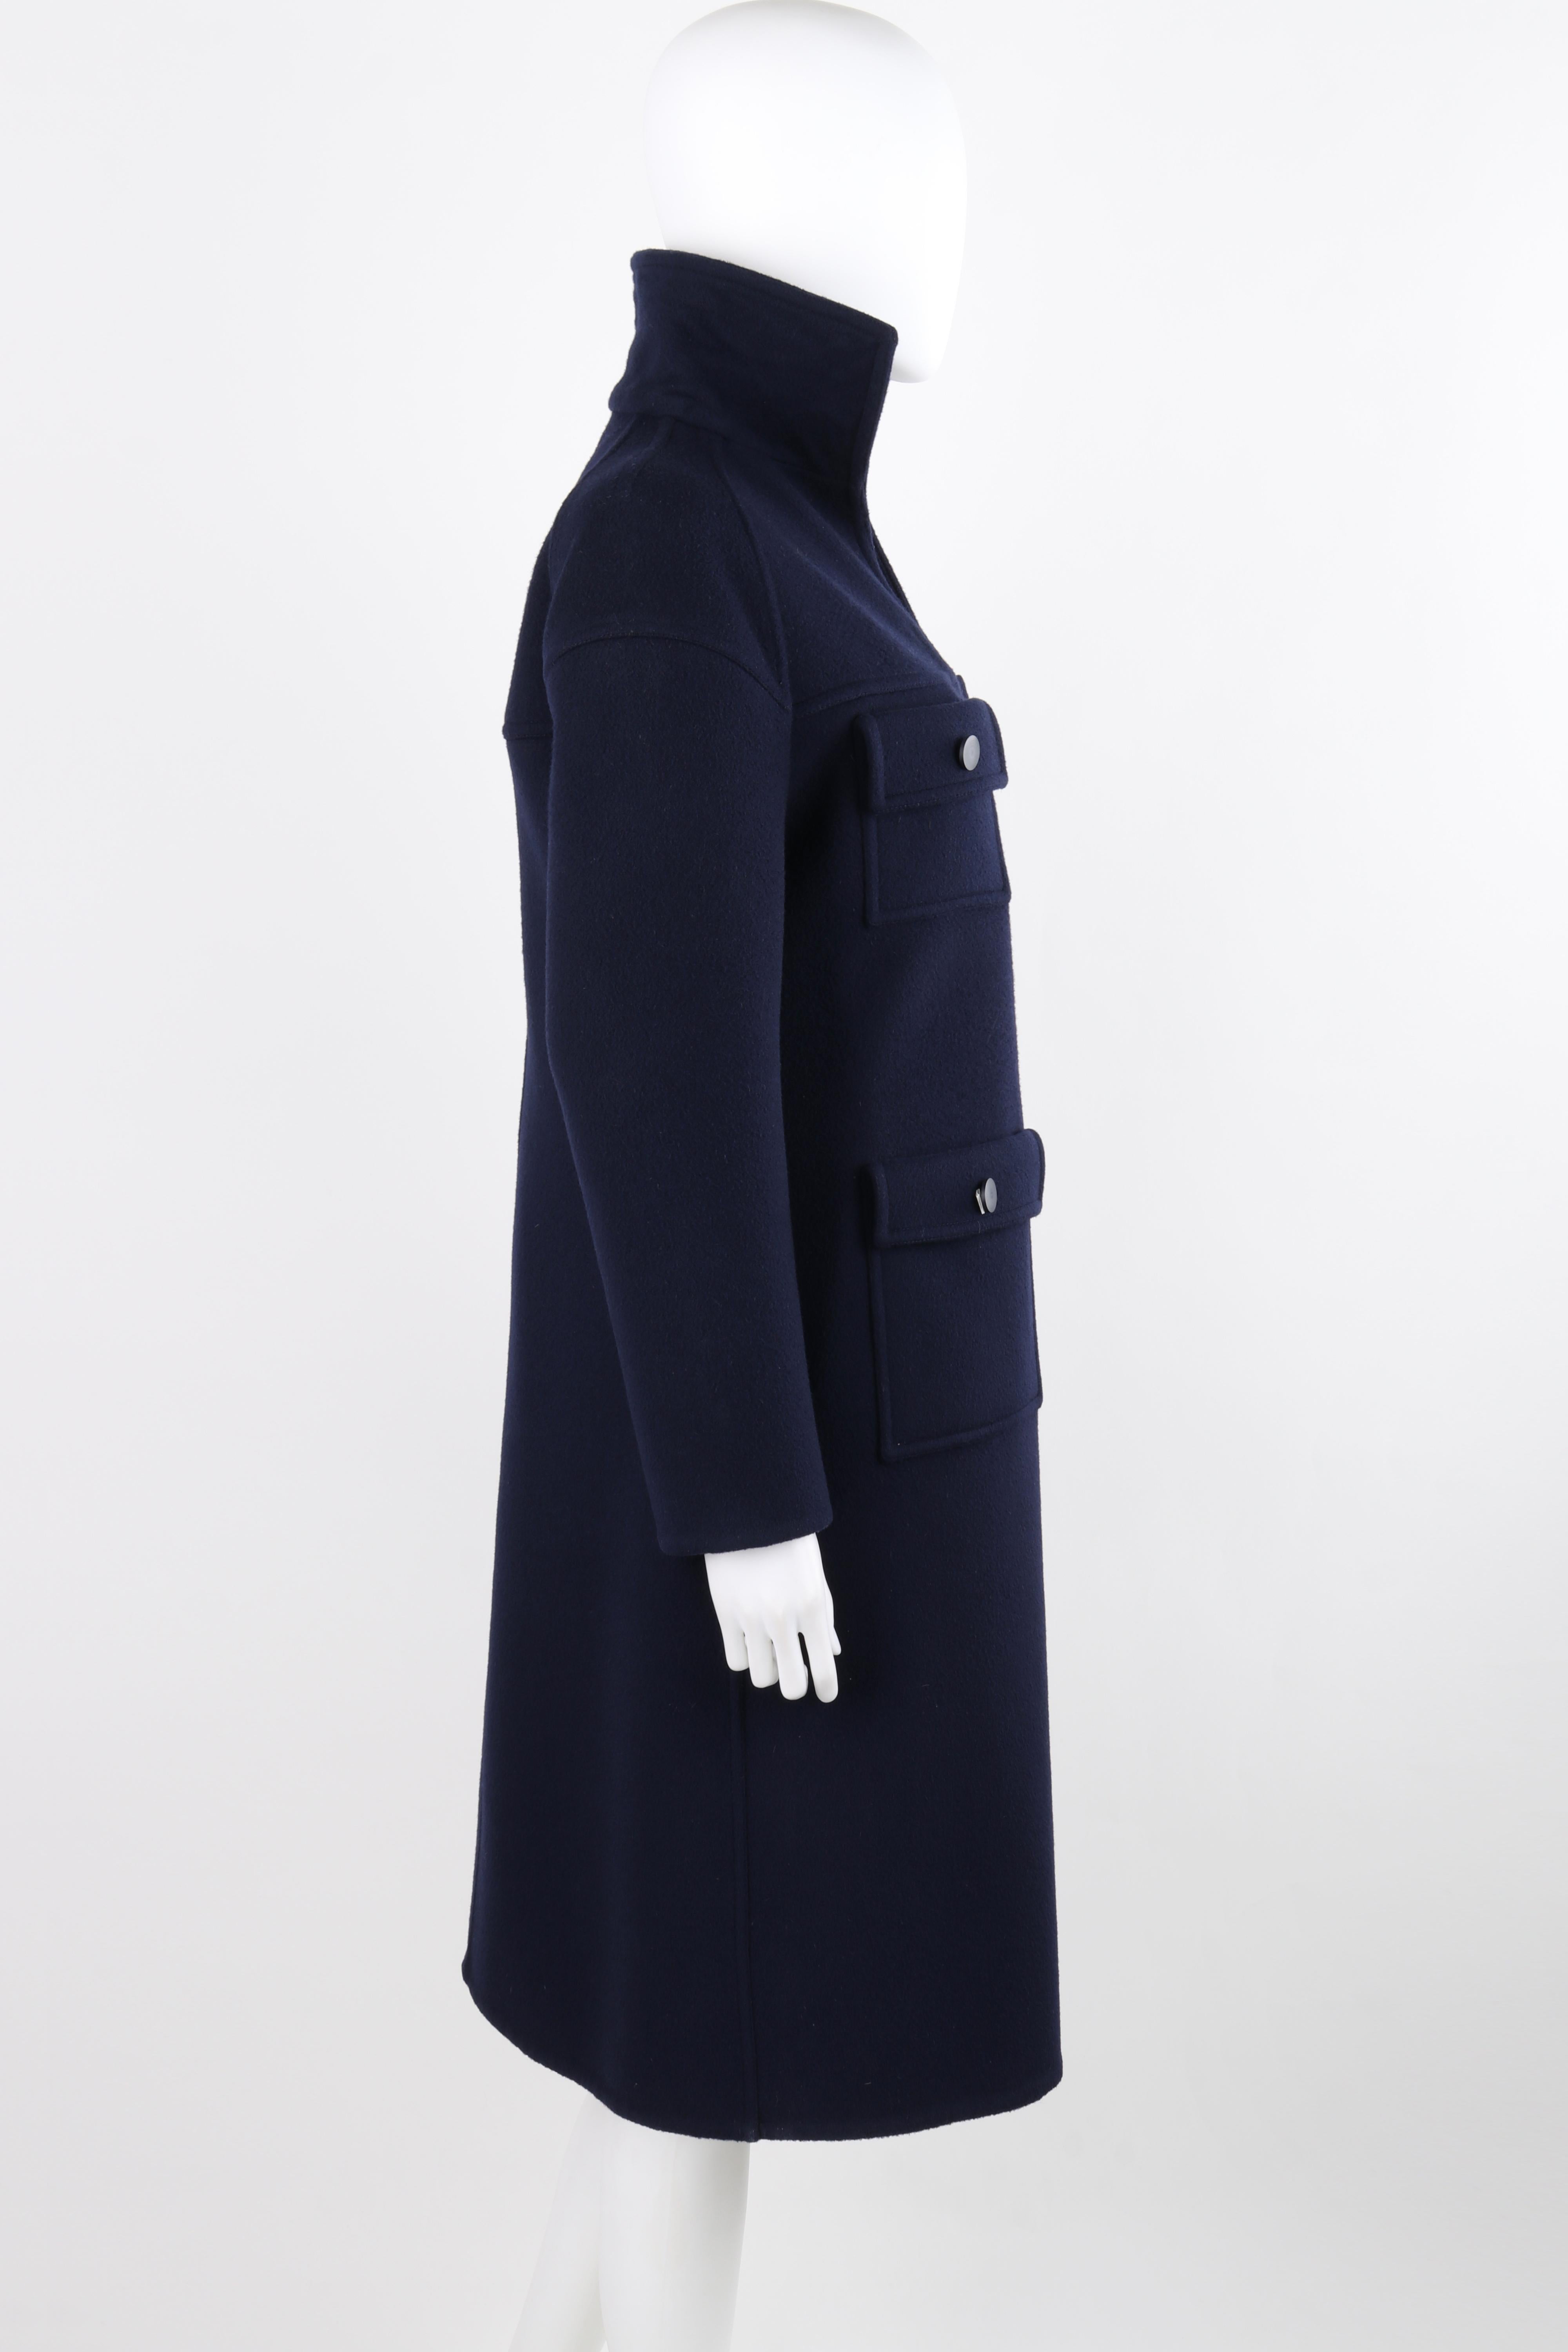 COURREGES c.1970's Couture Future Marine Navy Asymmetrical Button Front Overcoat For Sale 1